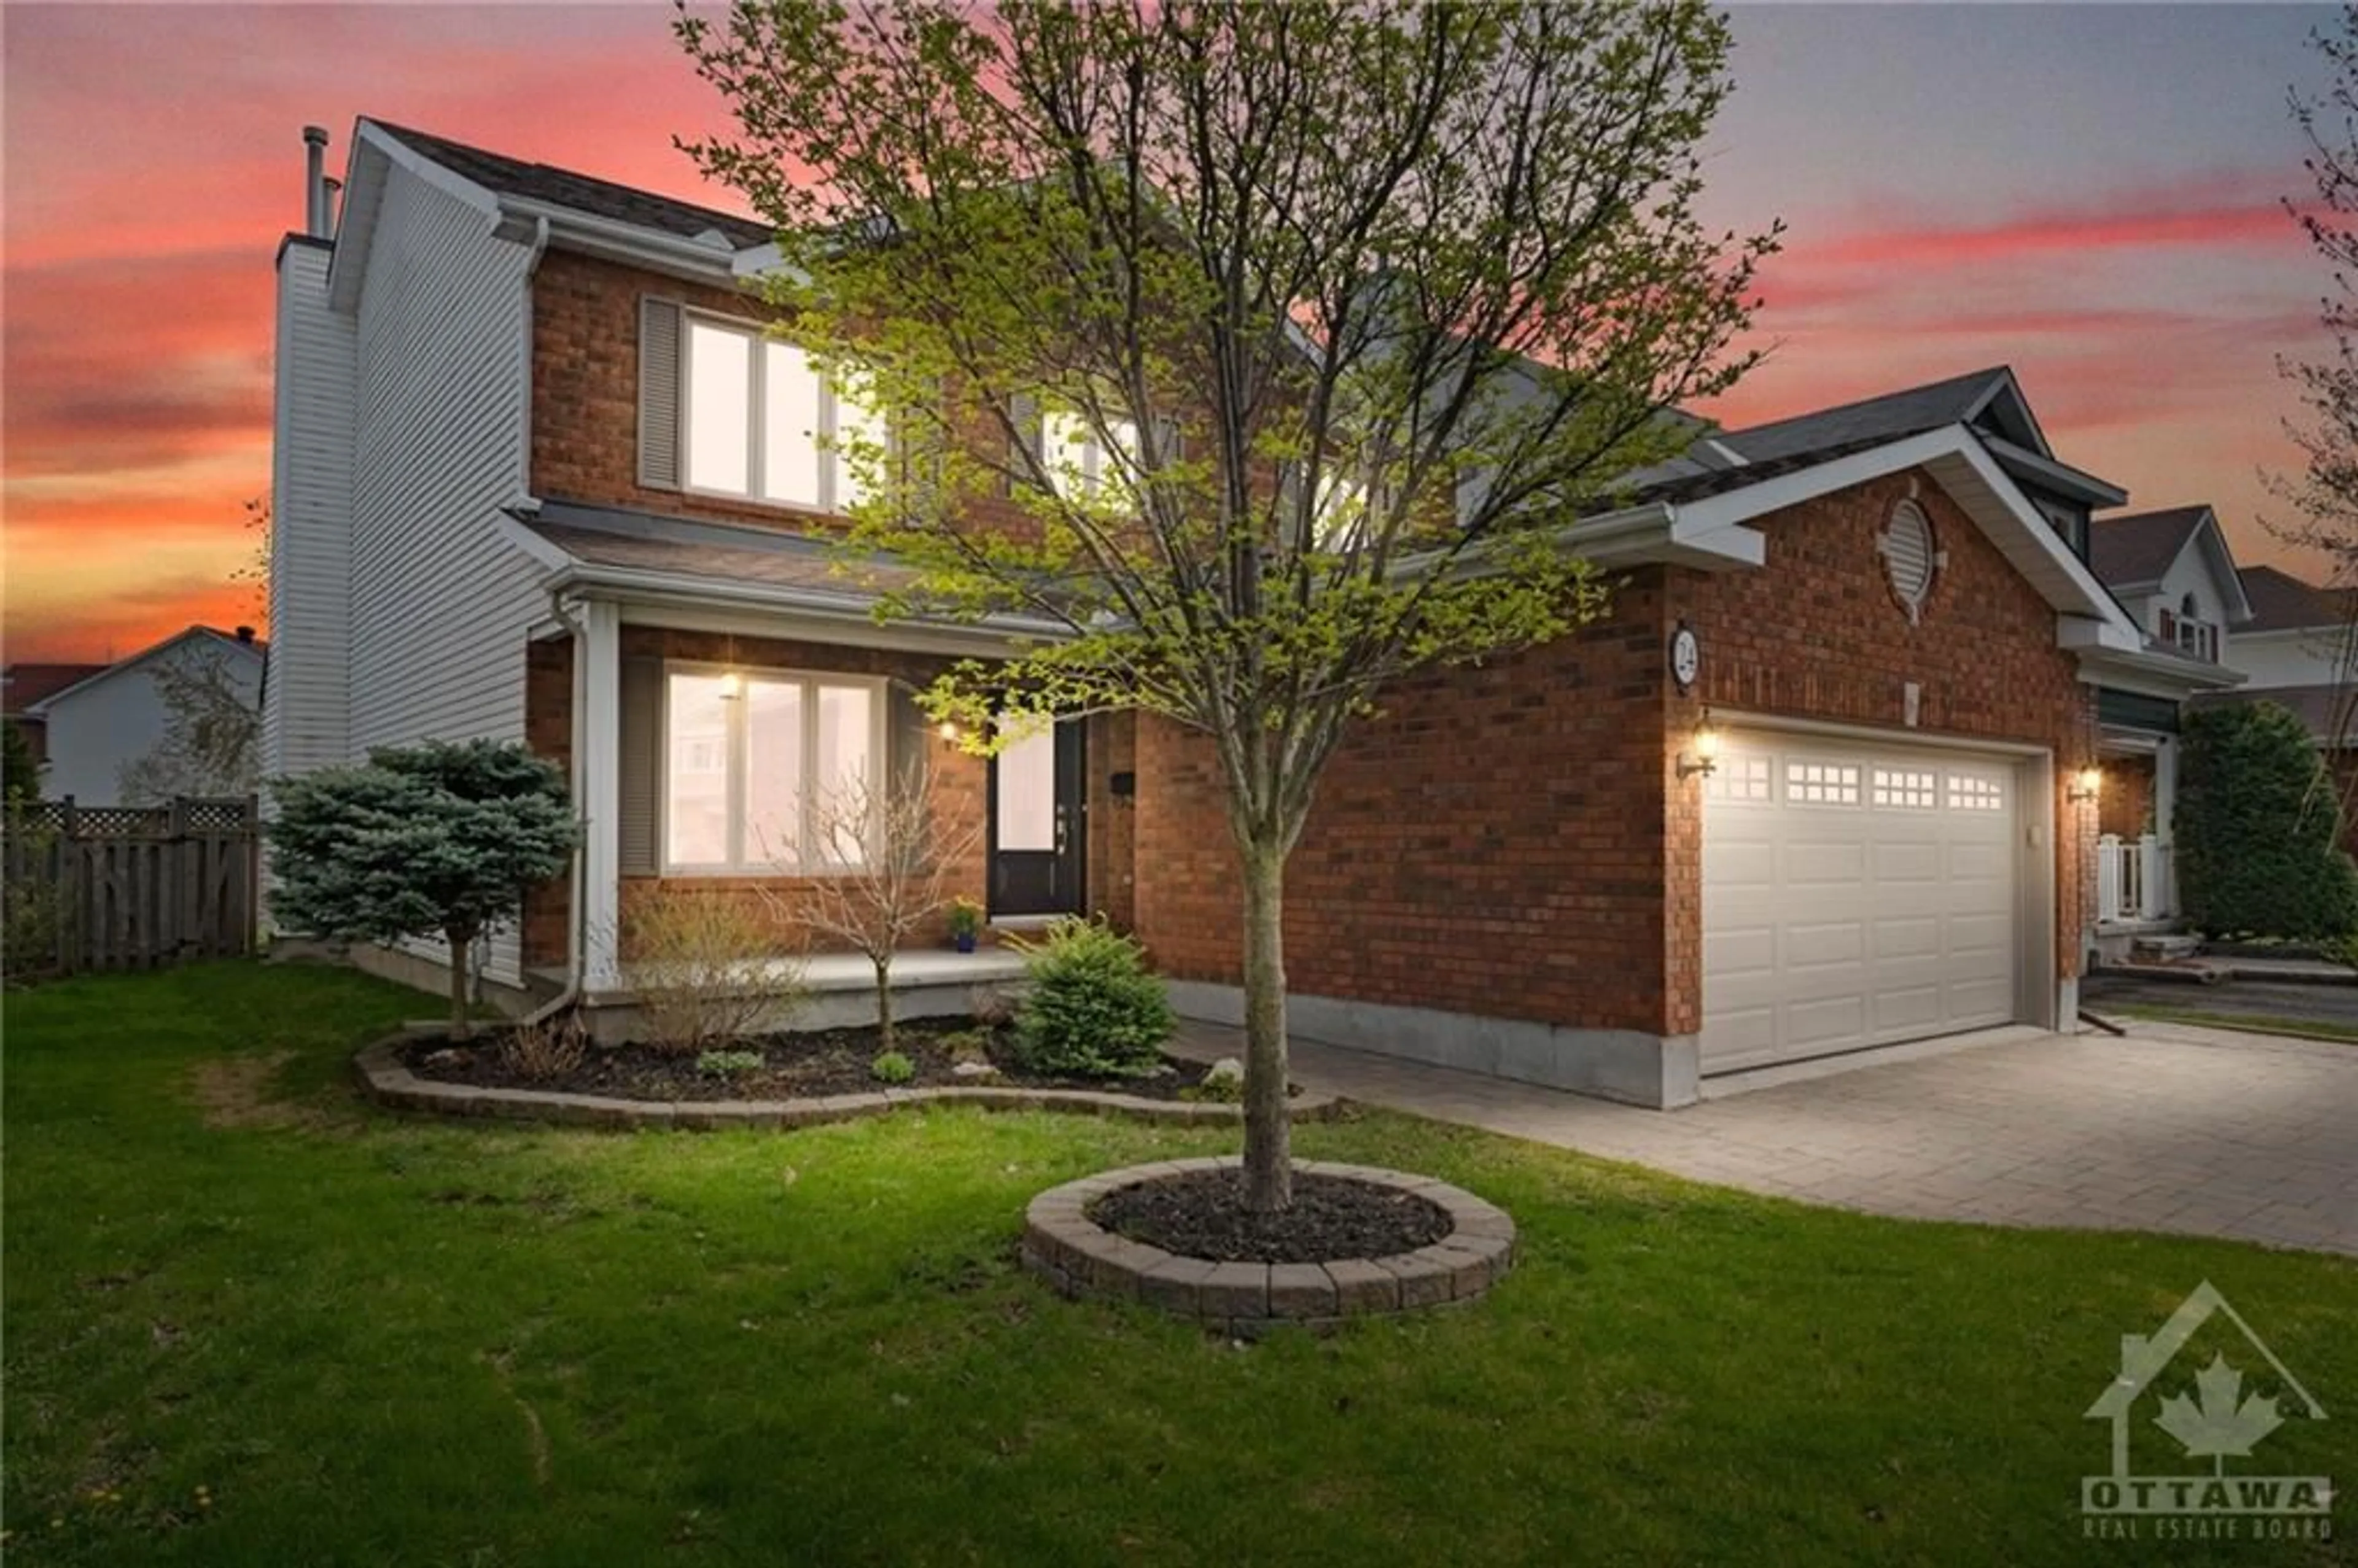 Home with brick exterior material for 24 RIDEAUCREST Dr, Ottawa Ontario K2G 6A4